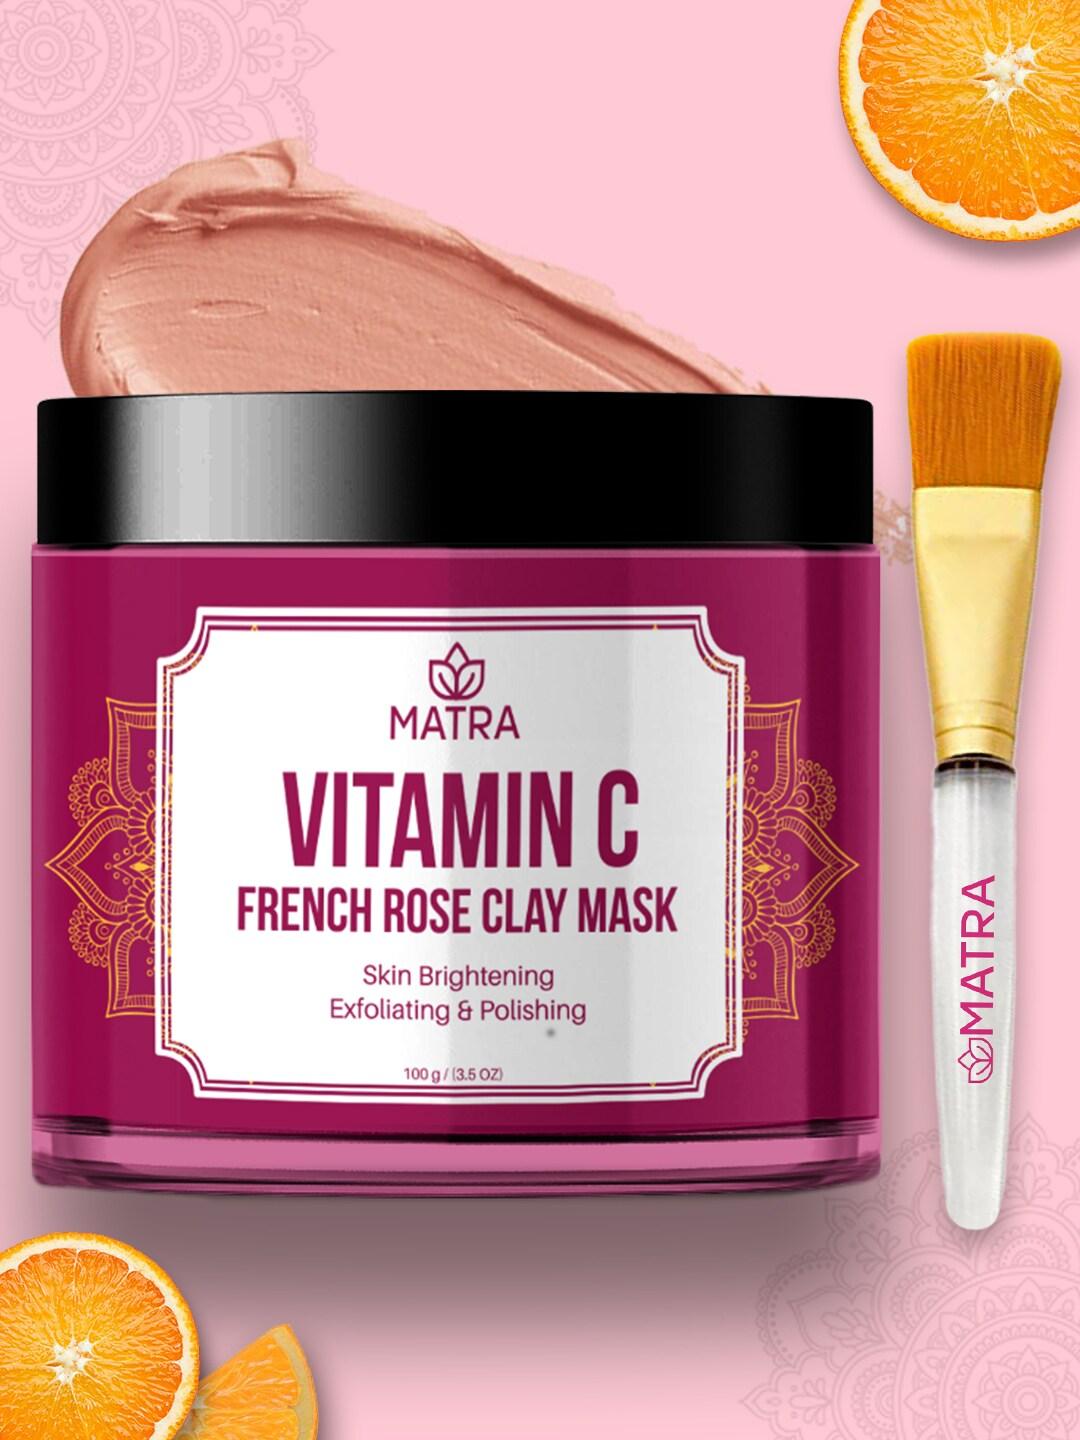 MATRA Vitamin C French Rose Clay Face Mask with Face Mask Brush - 100 g